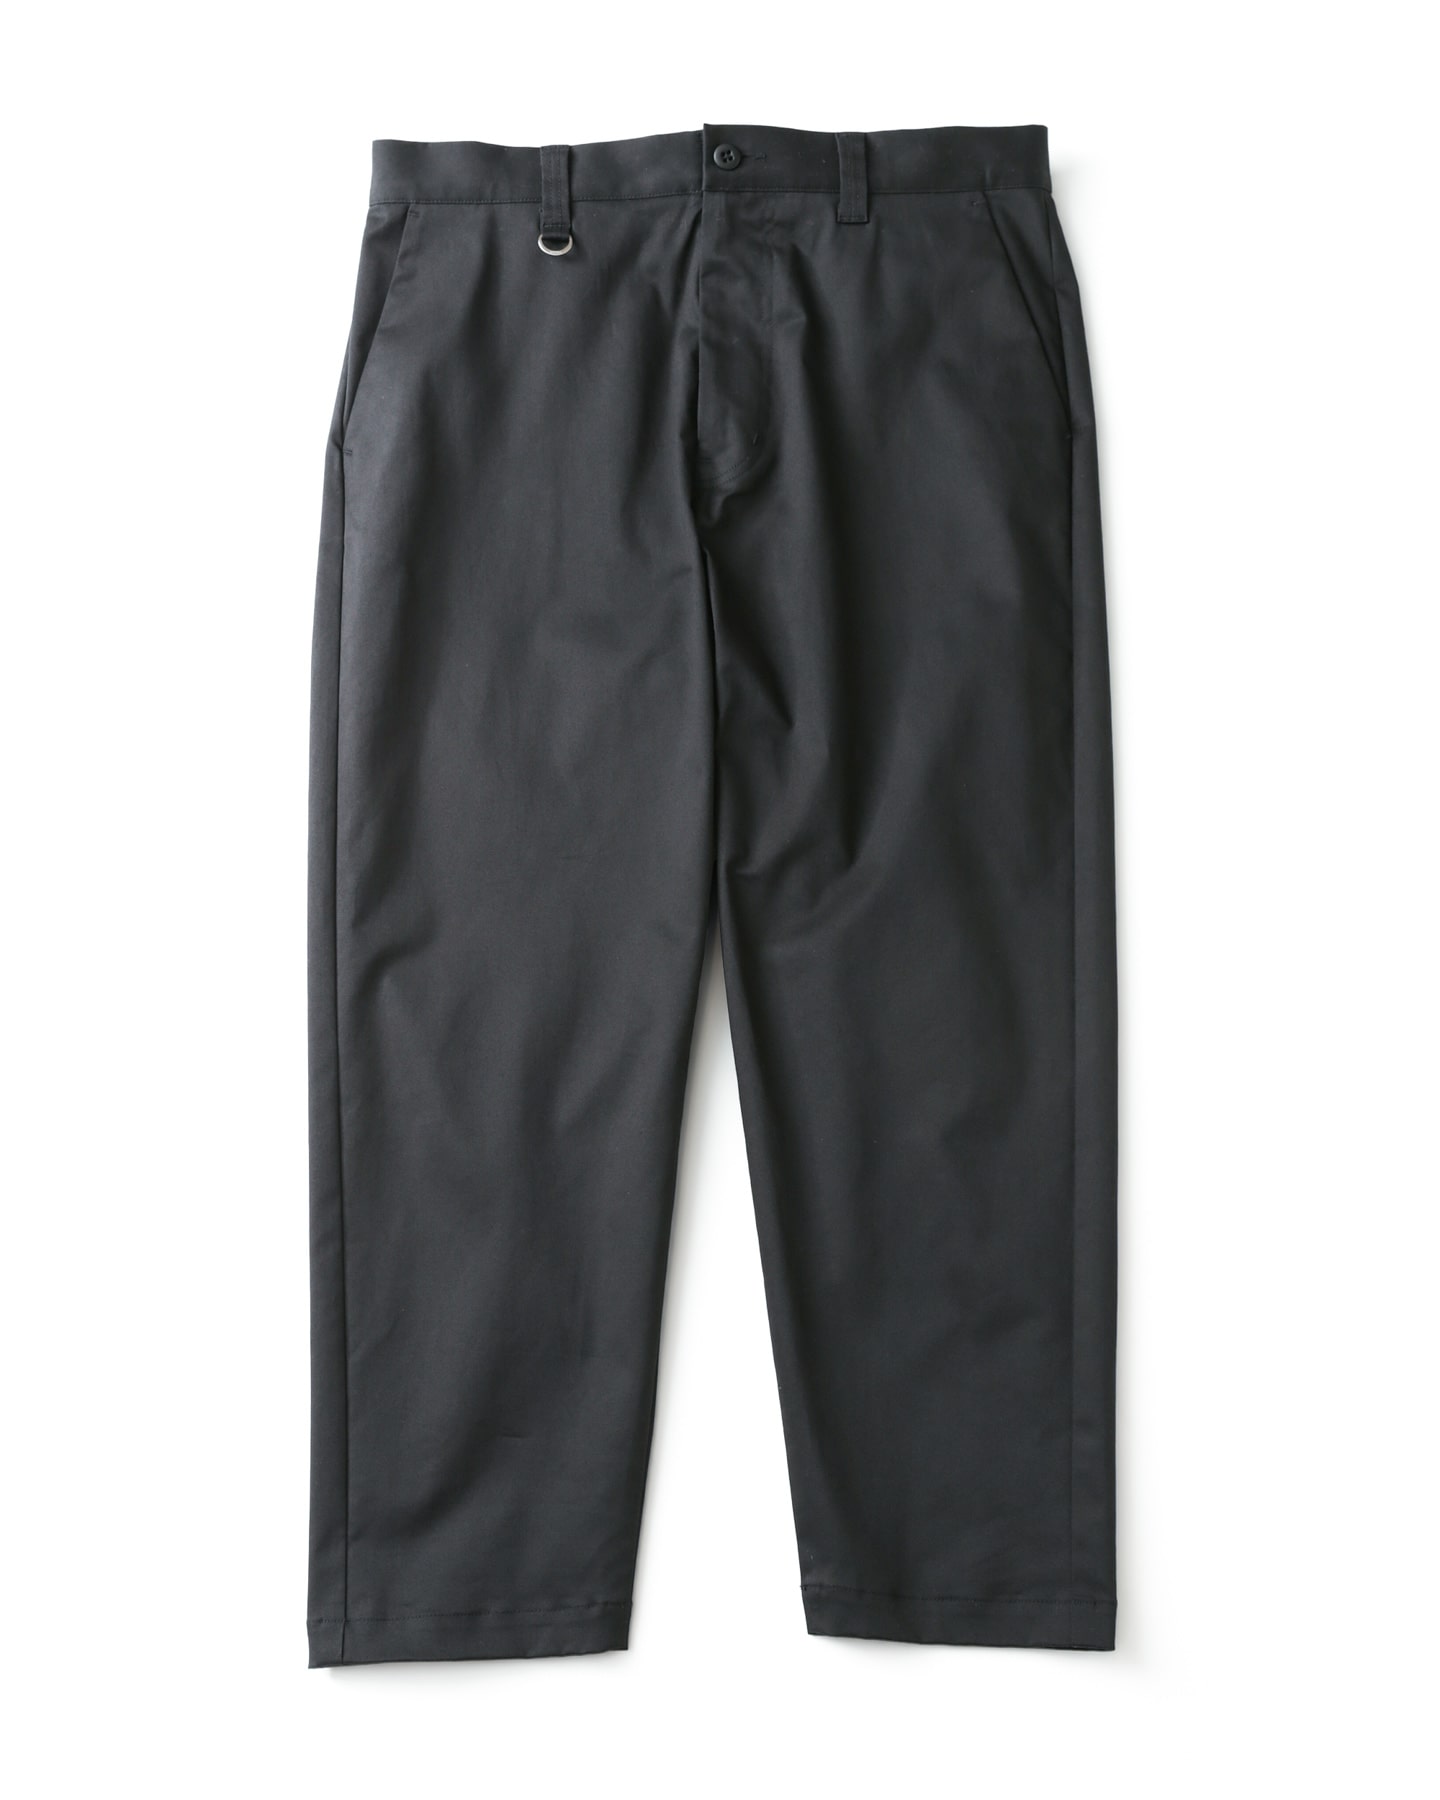 STRETCH CHINO WIDE CROPPED PANTS(M BLACK) - SOPH.